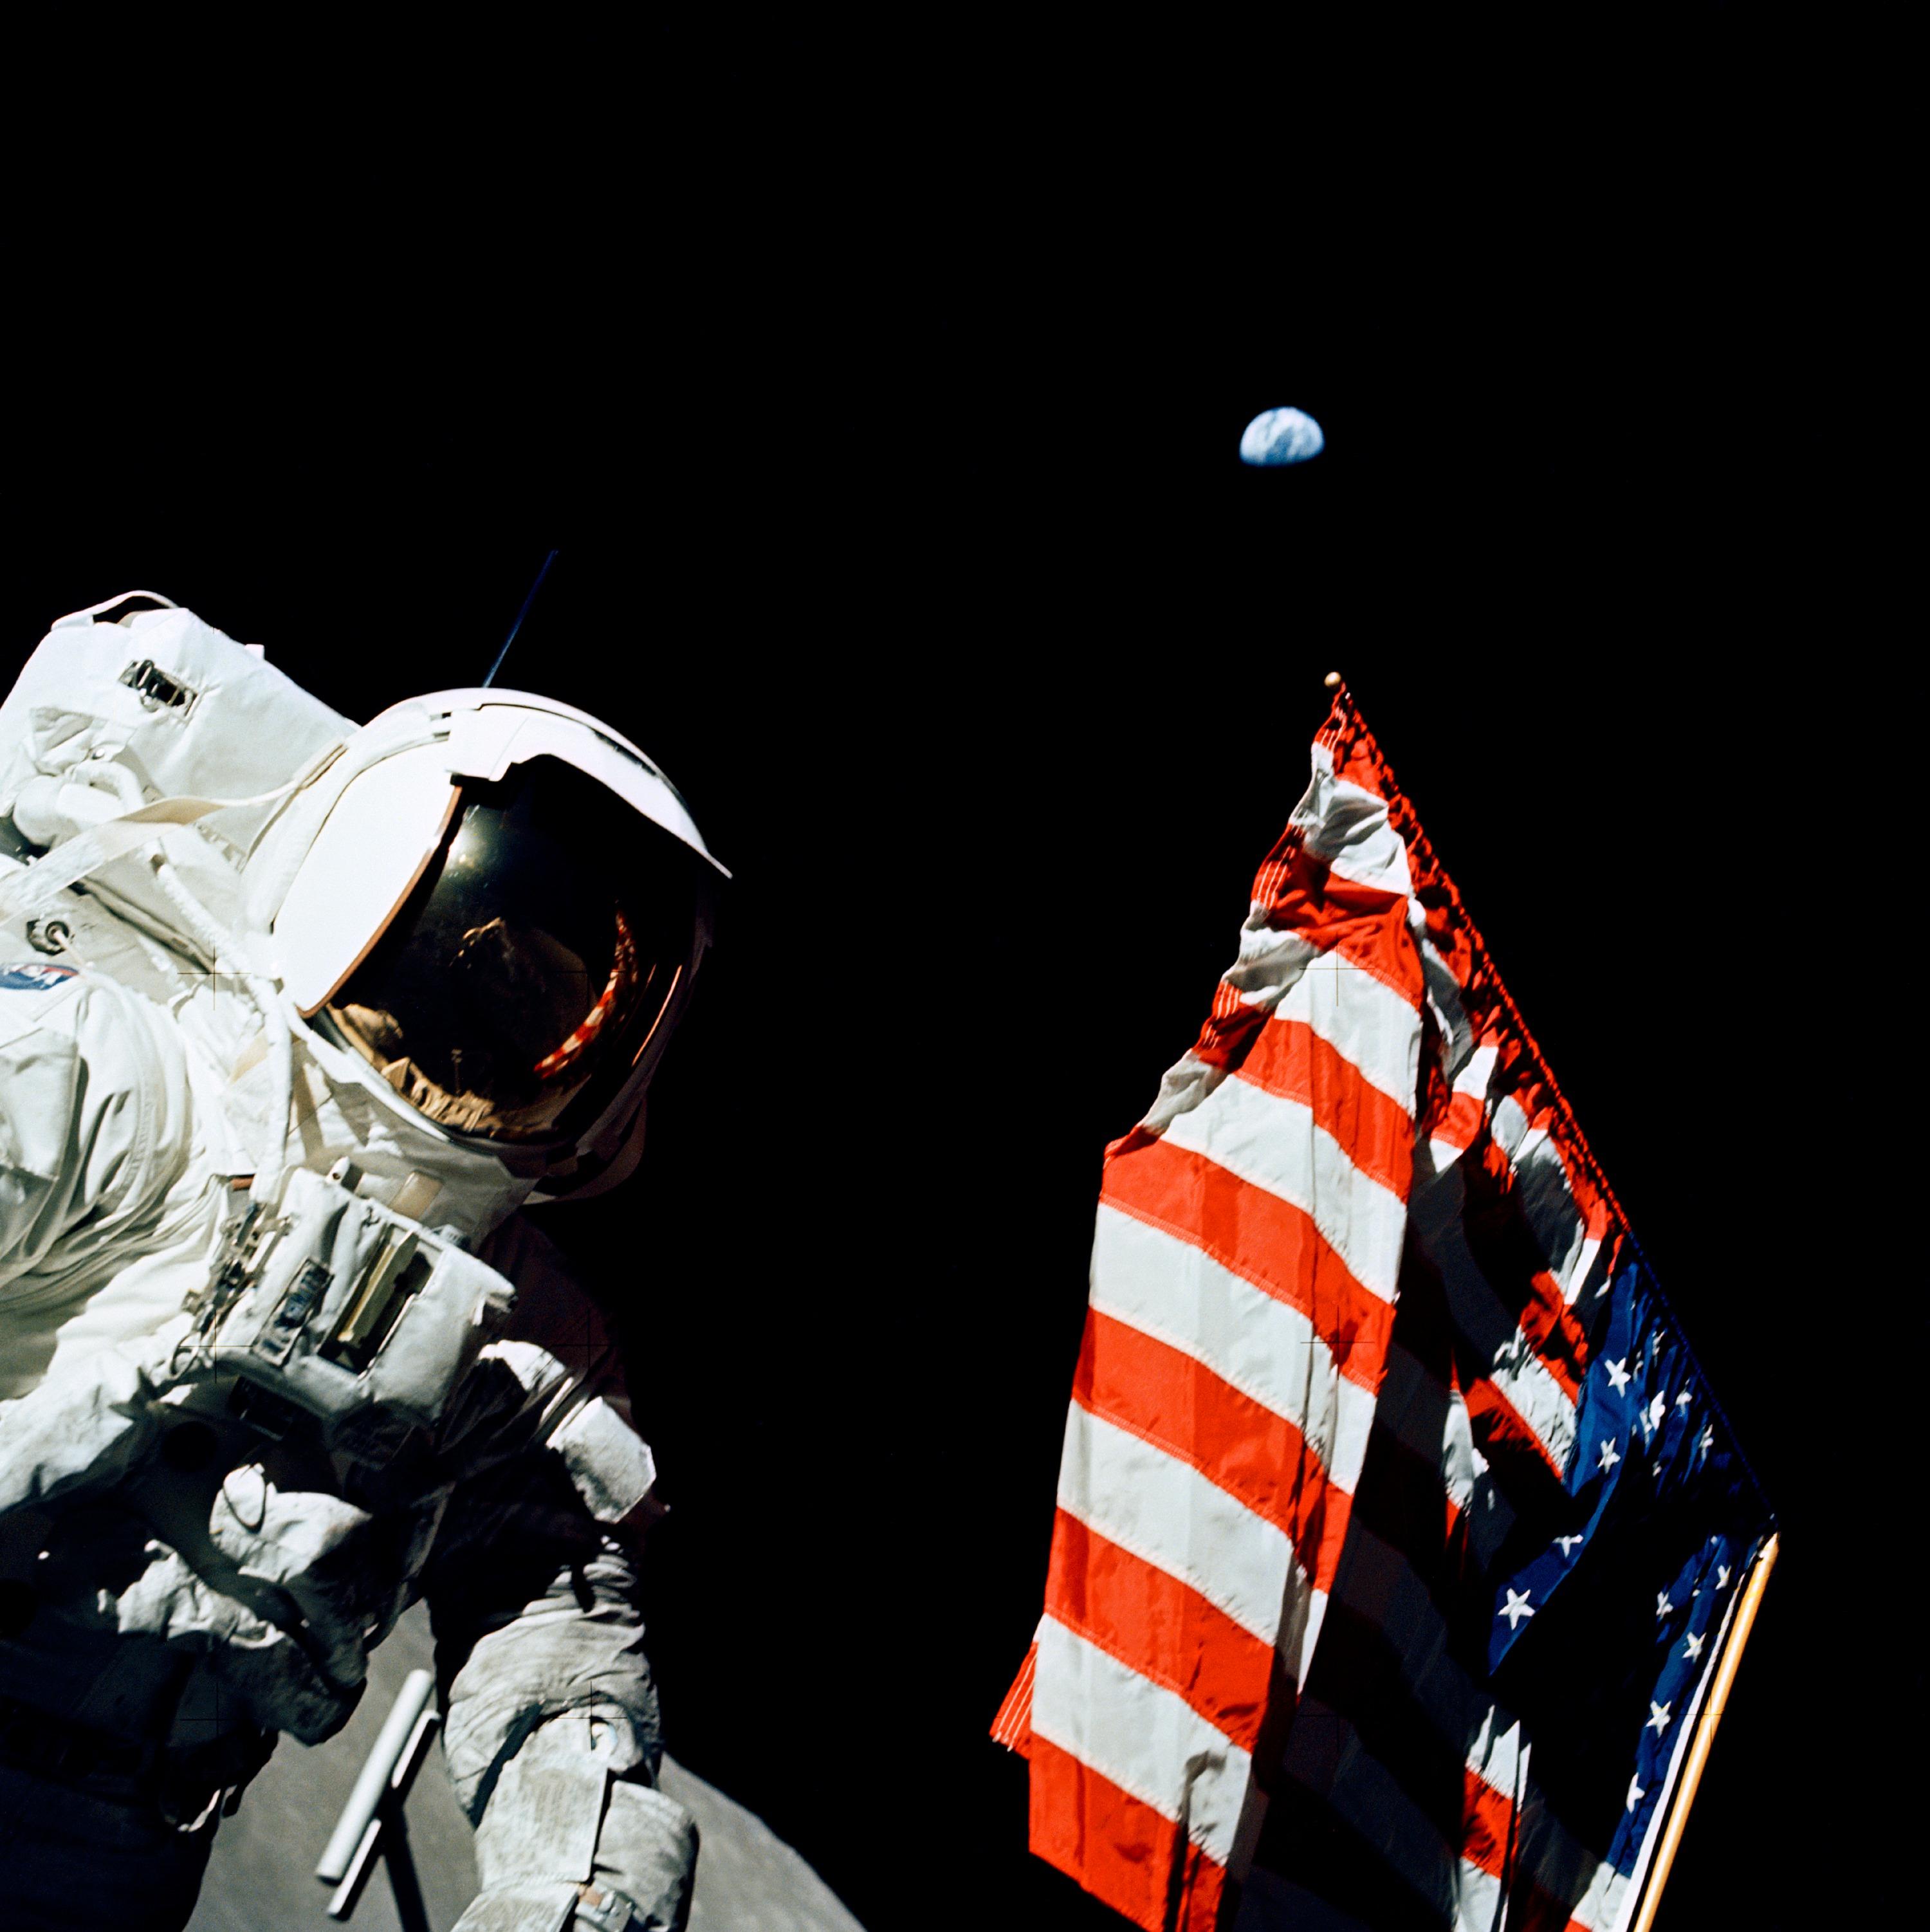 Color image of an astronaut and American flag on the Moon with Earth in the background.